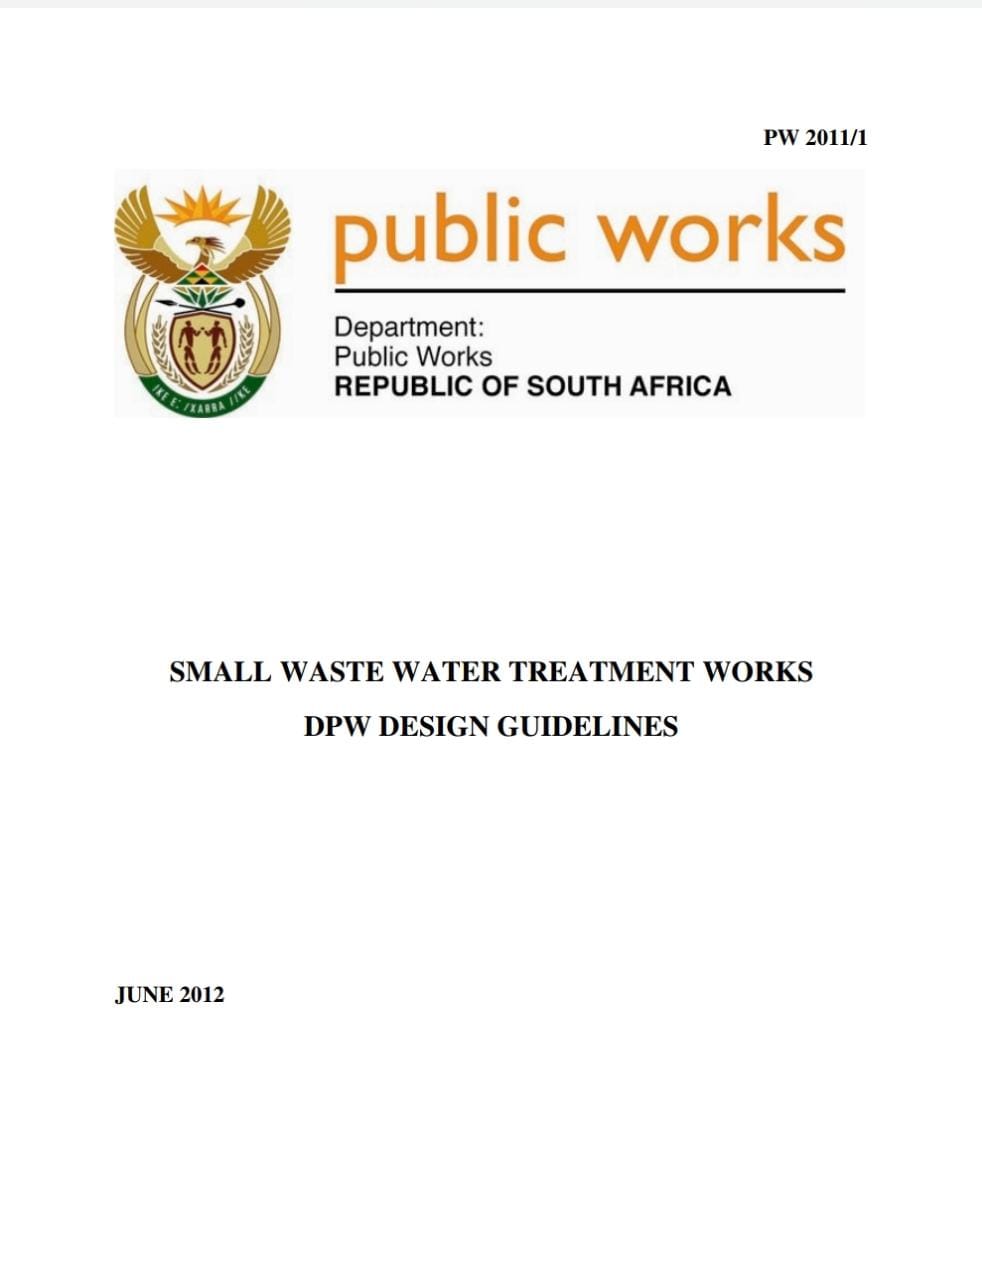 Small Wastewater Treatment Works DPW Design Guidelines